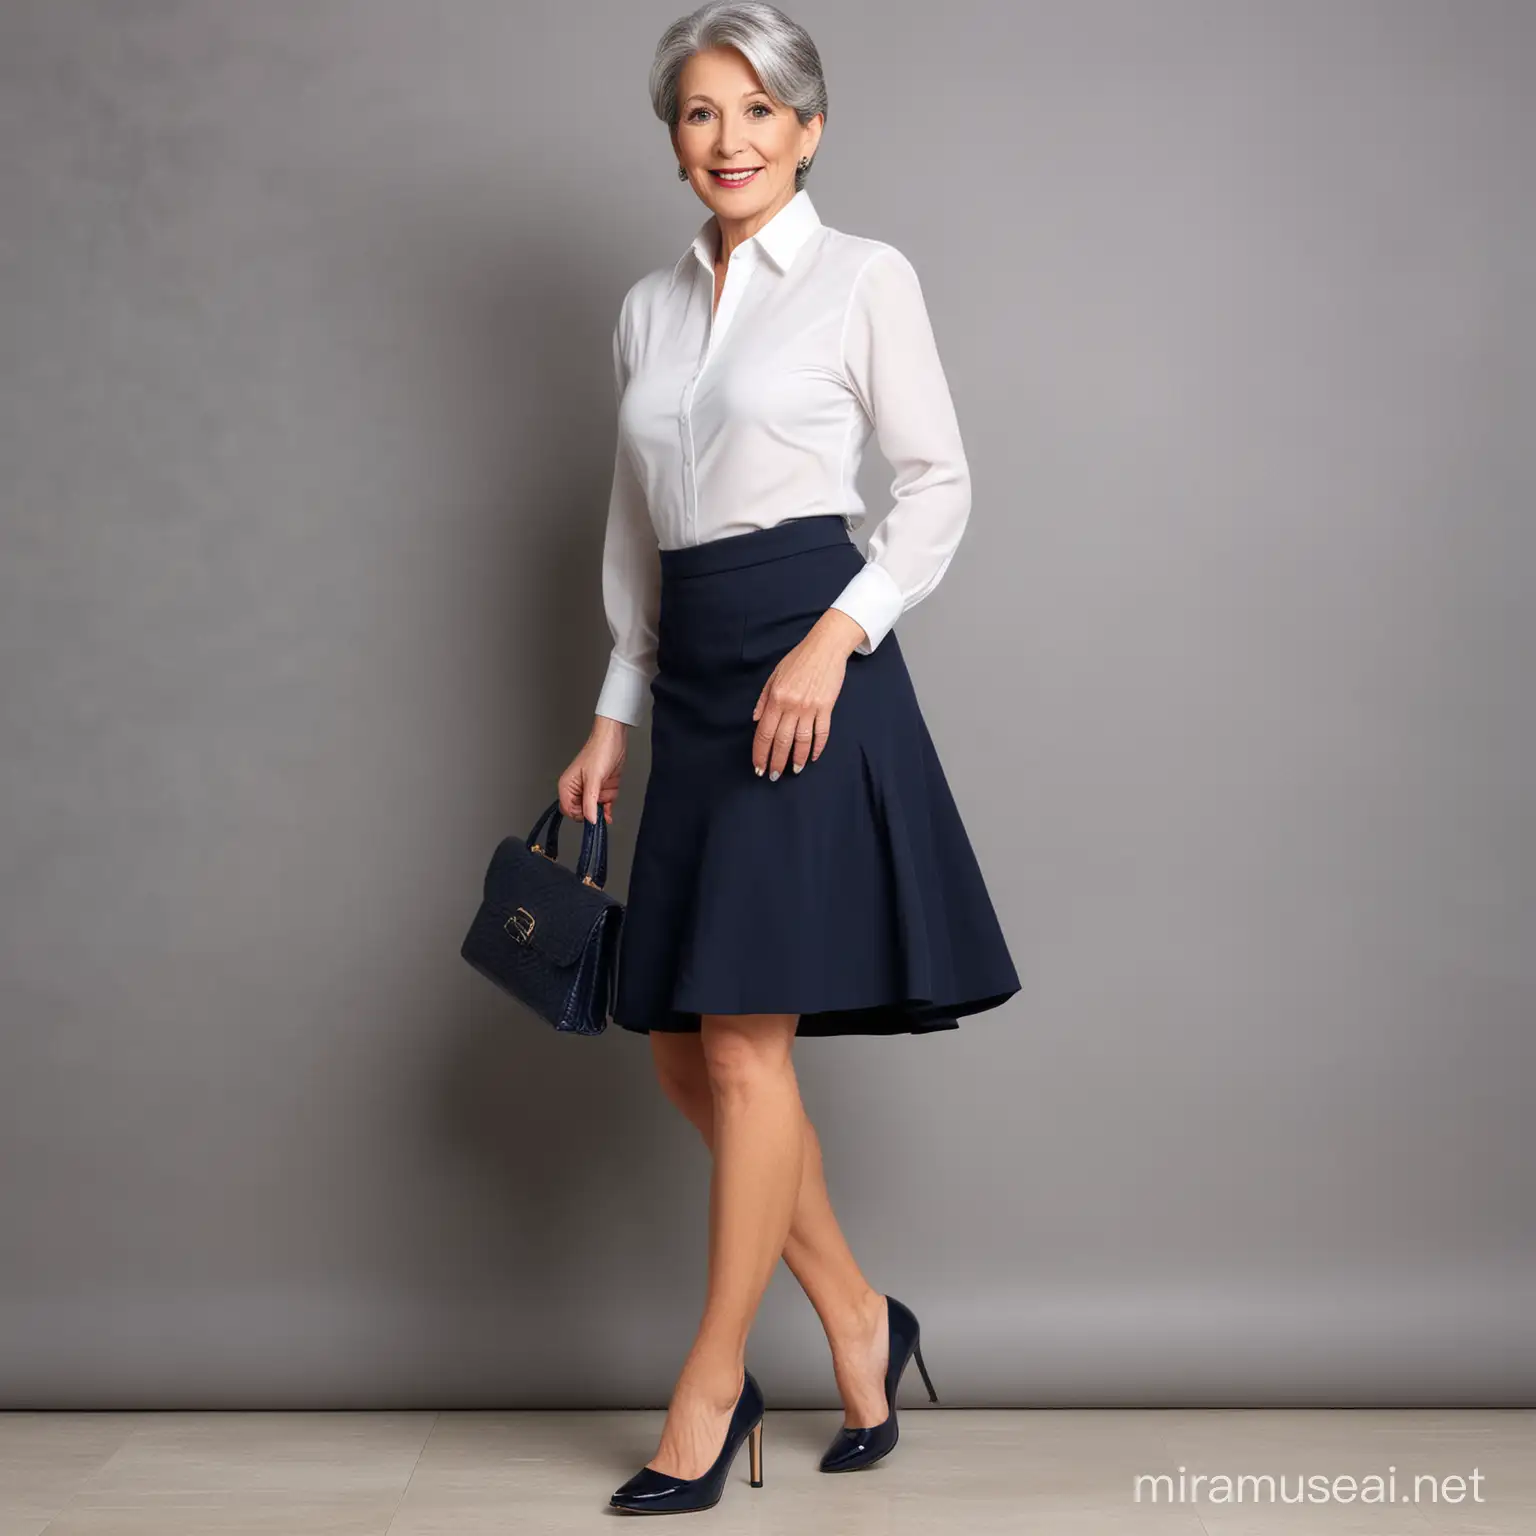 Elegant Mature Woman in Navy Blue Skirt and White Blouse